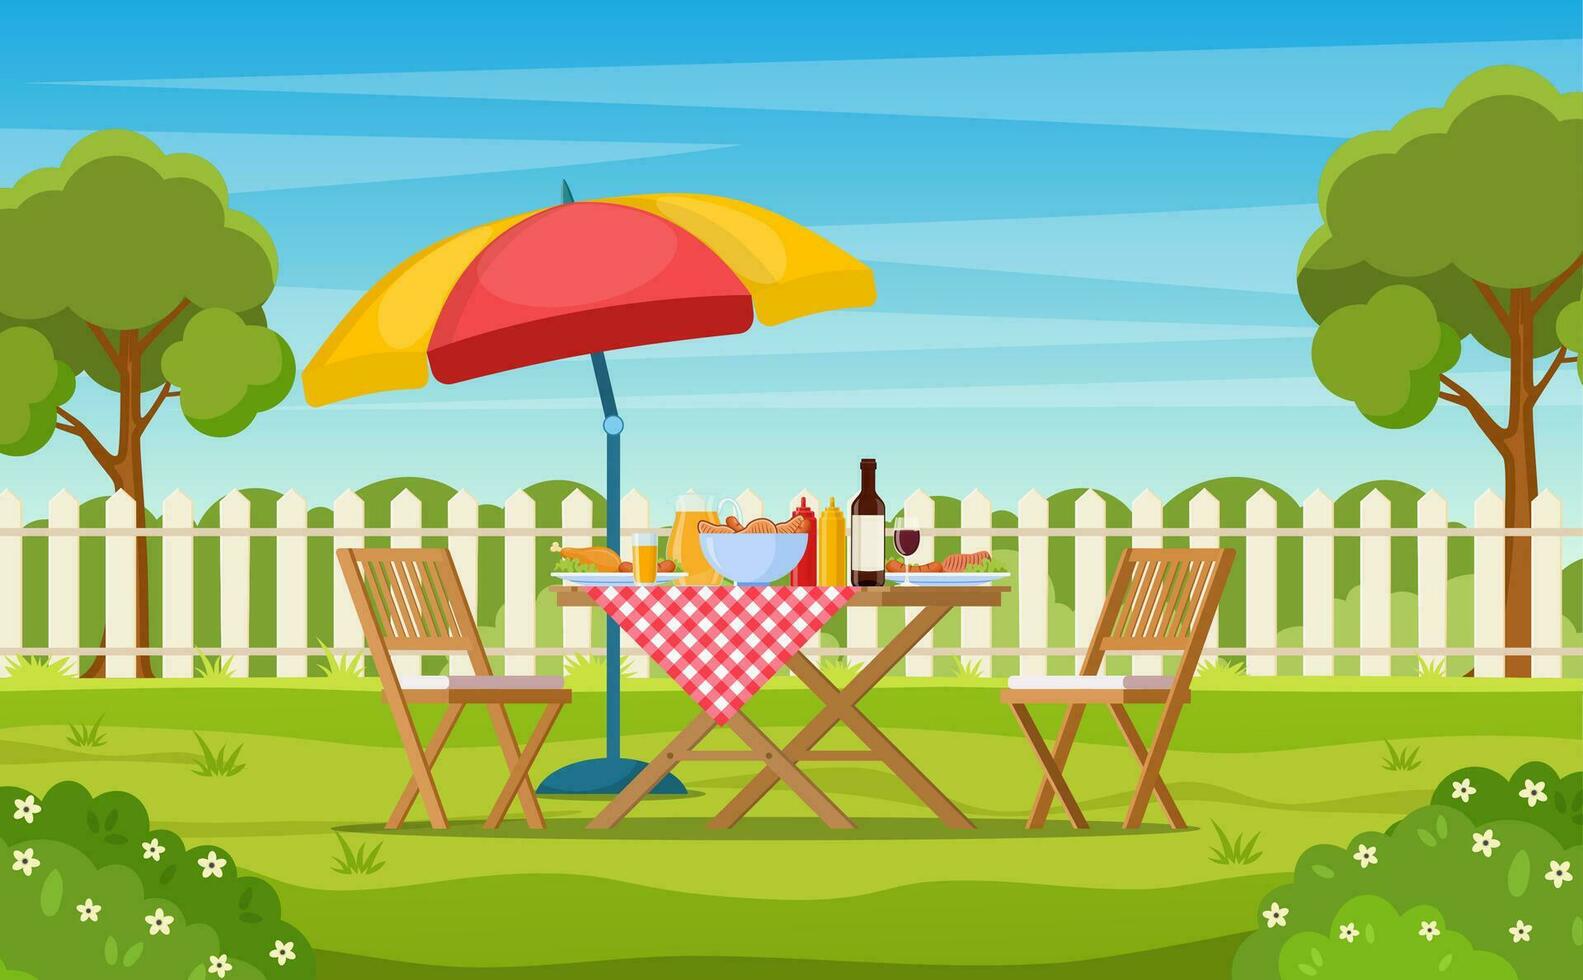 Barbecue party in the backyard with fence, trees, bushes. picnic with barbecue on summer lawn in park or garden food on table, chairs and umbrella. vector illustration in flat design